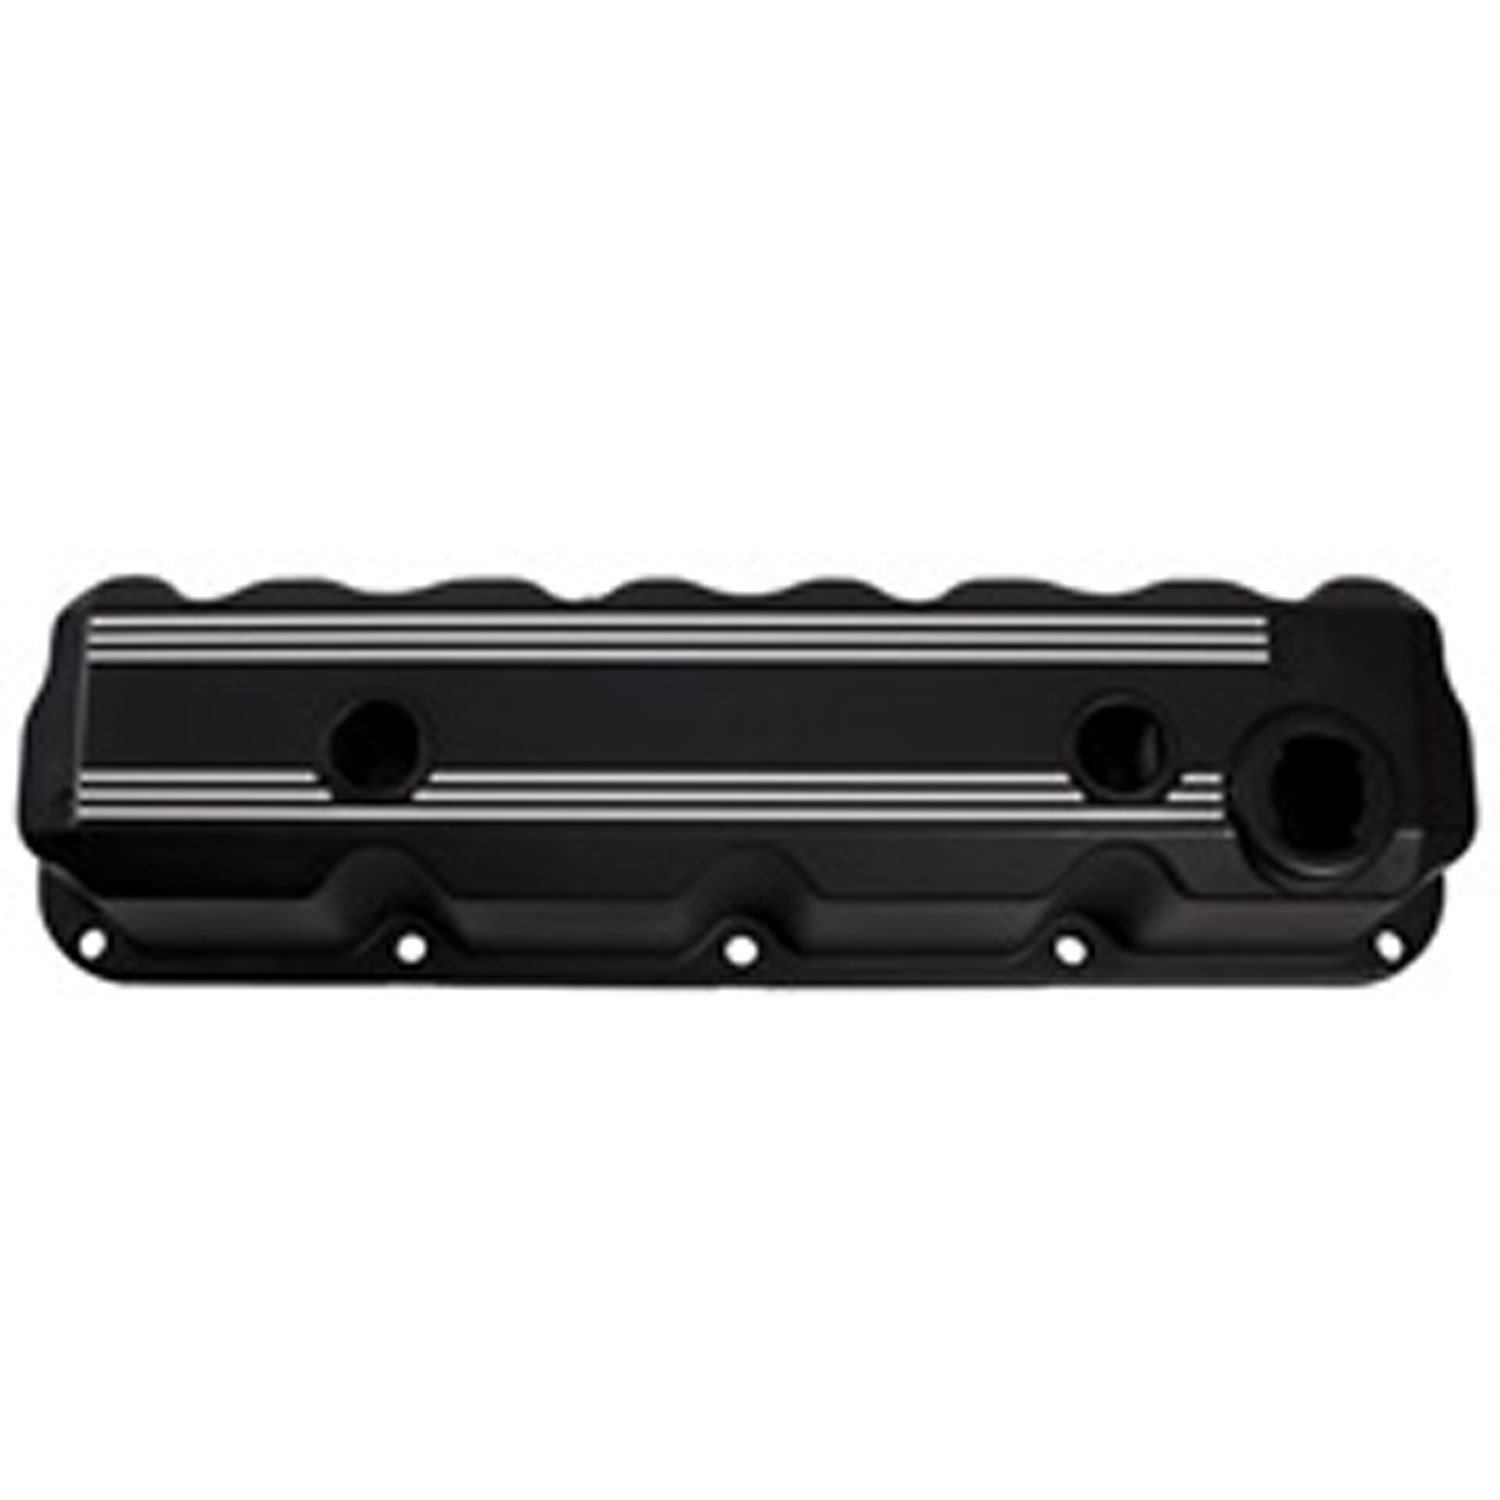 This factory-style valve cover from Omix-ADA fits 83-86 Jeep CJs and 87-92 Wranglers with a carbureted 2.5L engine.